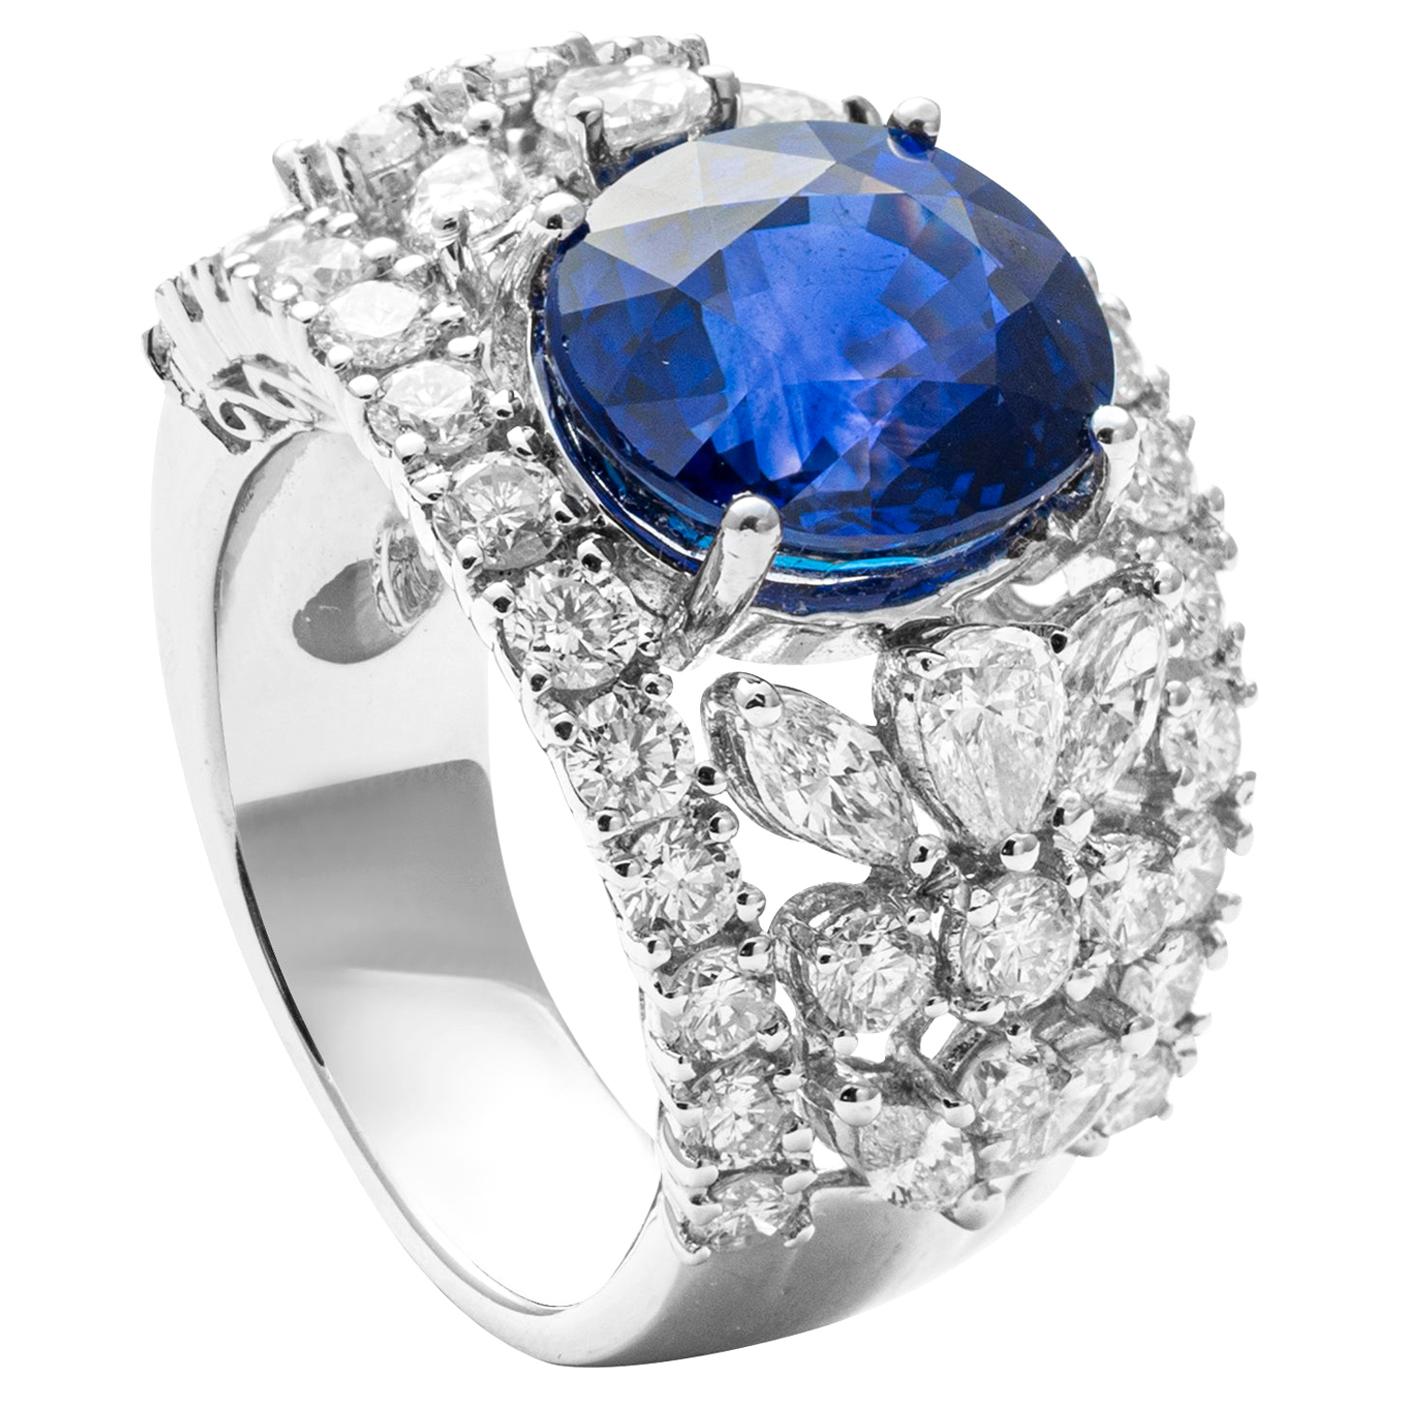 7.35 Carat Blue Sapphire and Diamond Cocktail Ring in 18 Karat White Gold For Sale